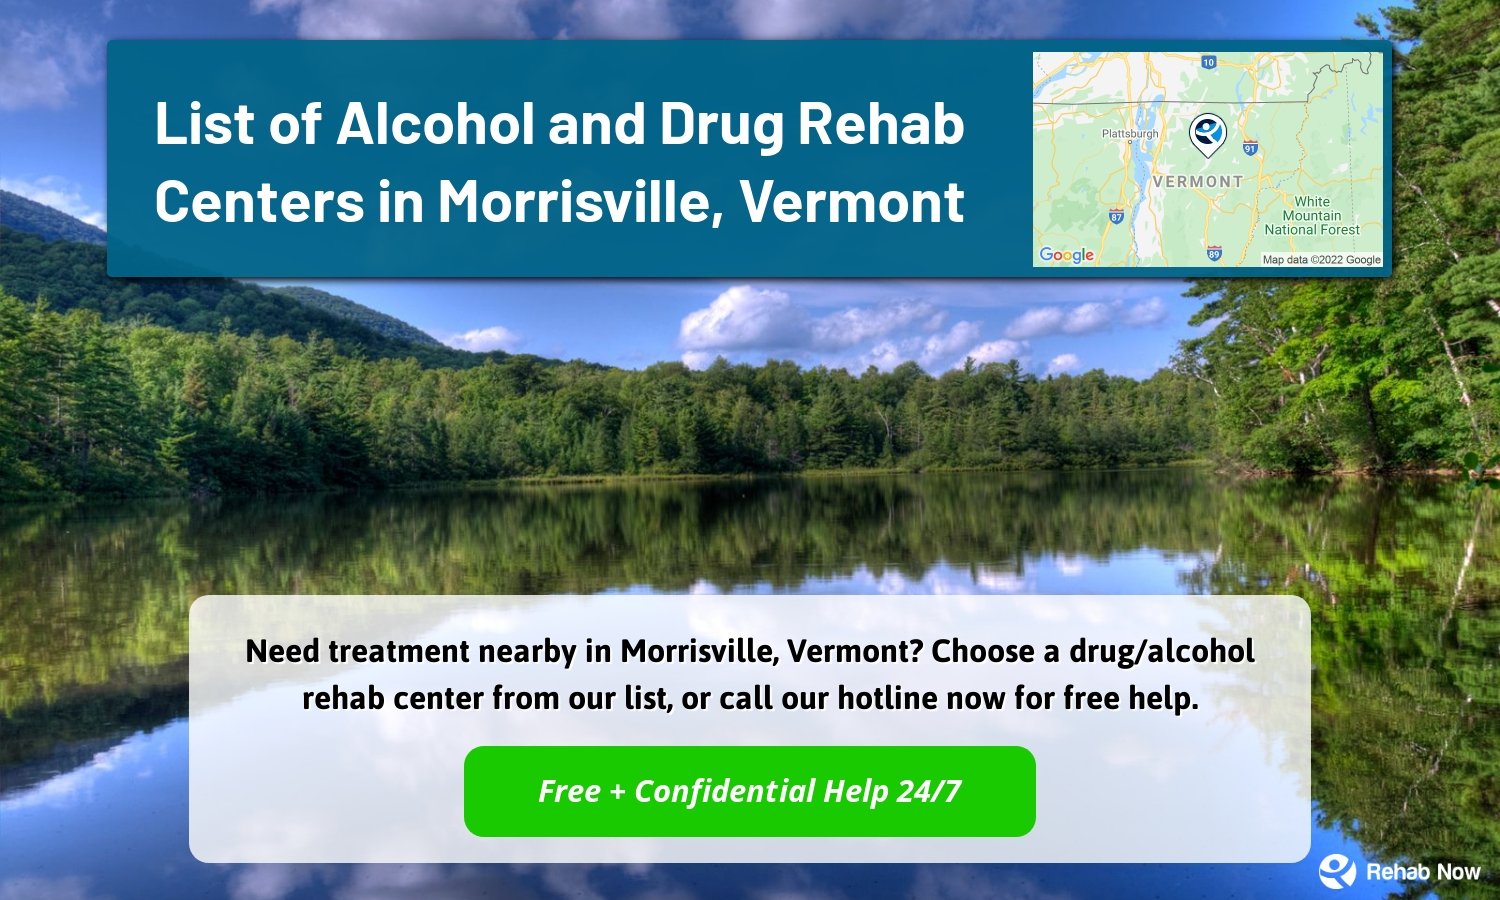 Need treatment nearby in Morrisville, Vermont? Choose a drug/alcohol rehab center from our list, or call our hotline now for free help.